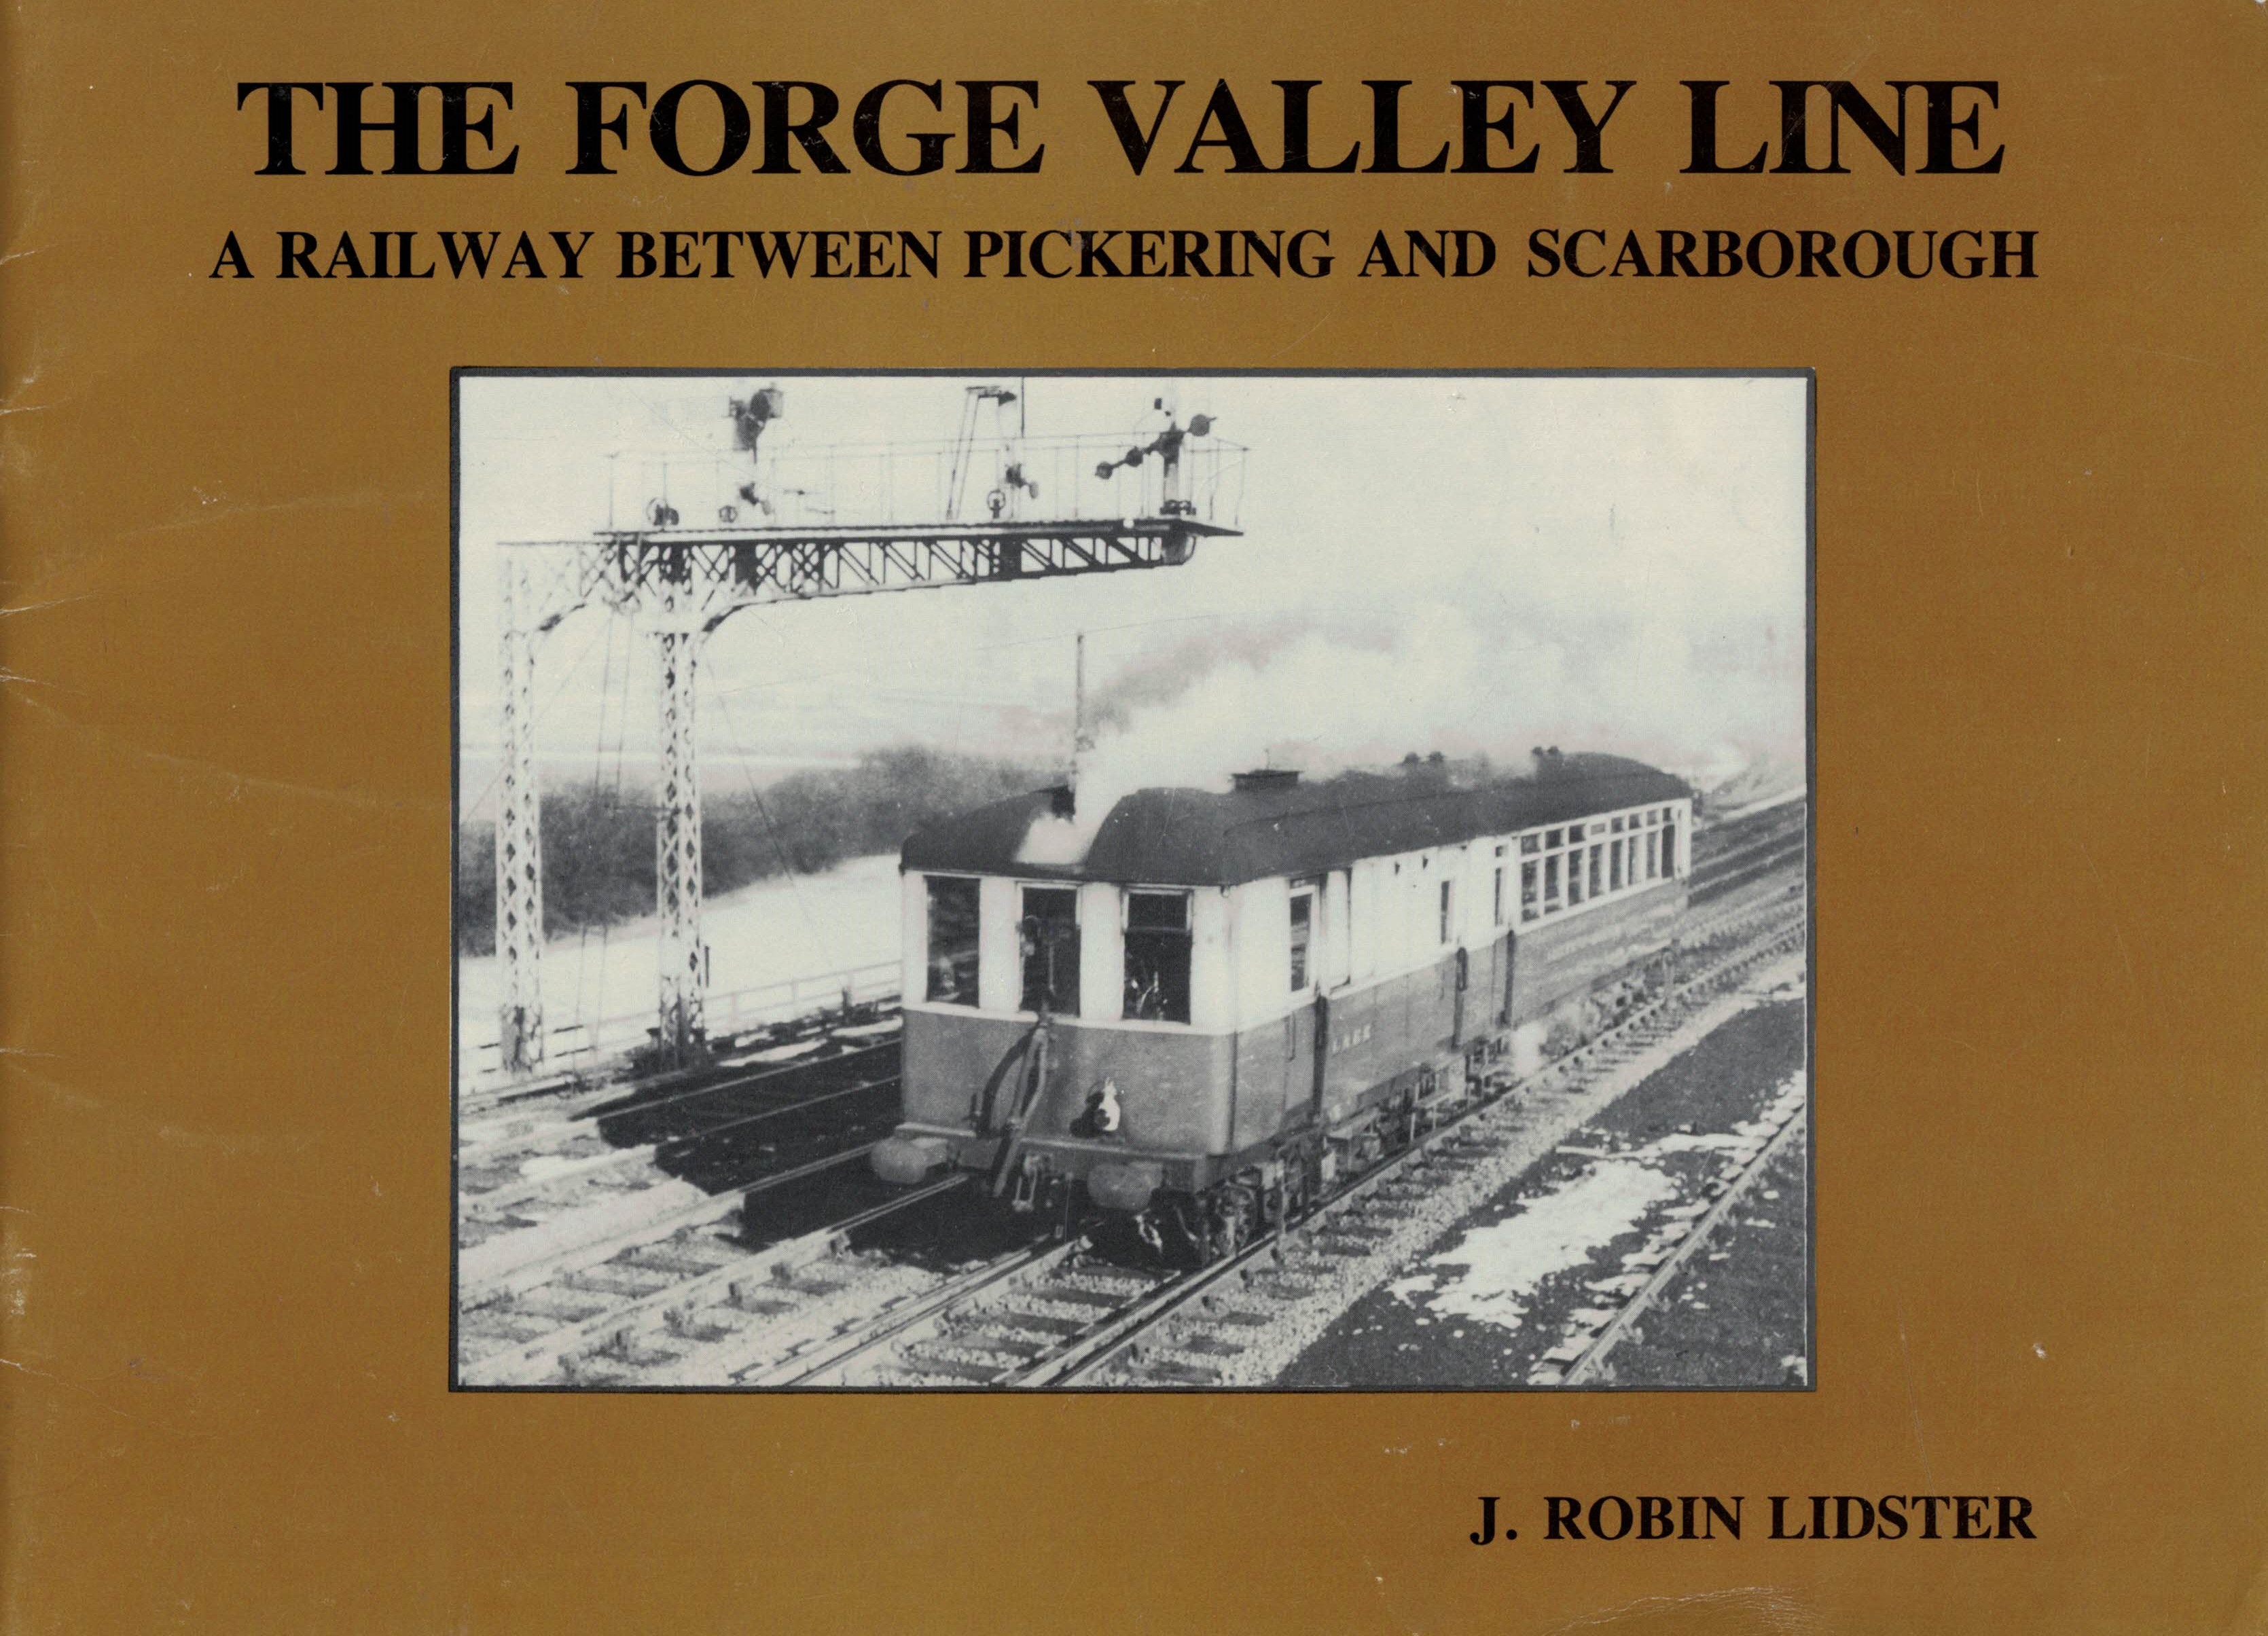 The Forge Valley Line. A Railway Between Pickering and Scarborough. Signed copy.